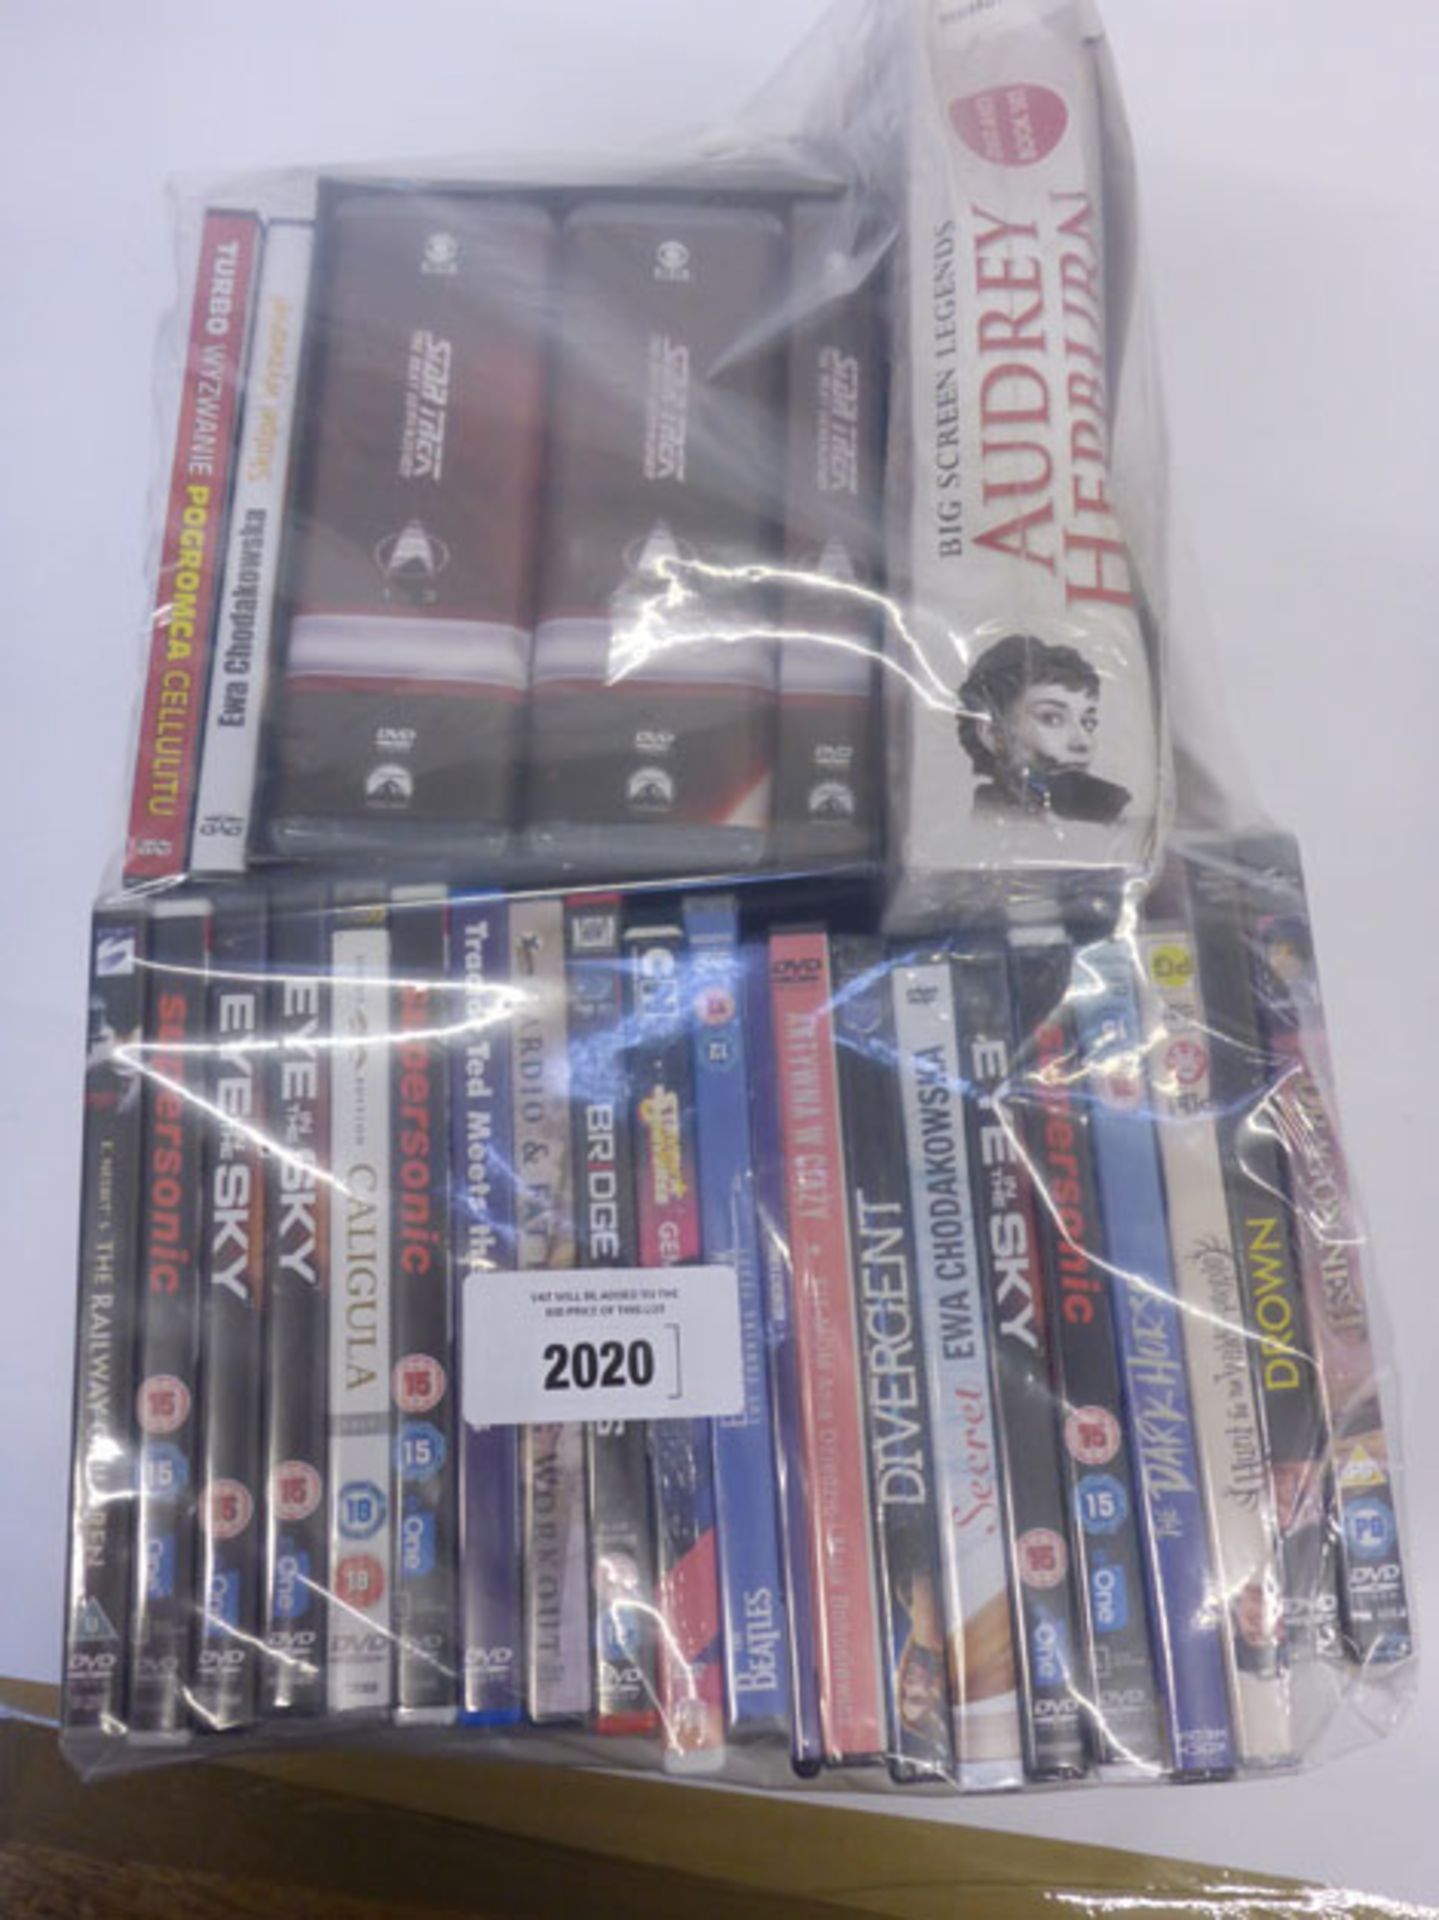 Bag containing 25 various titled DVD films